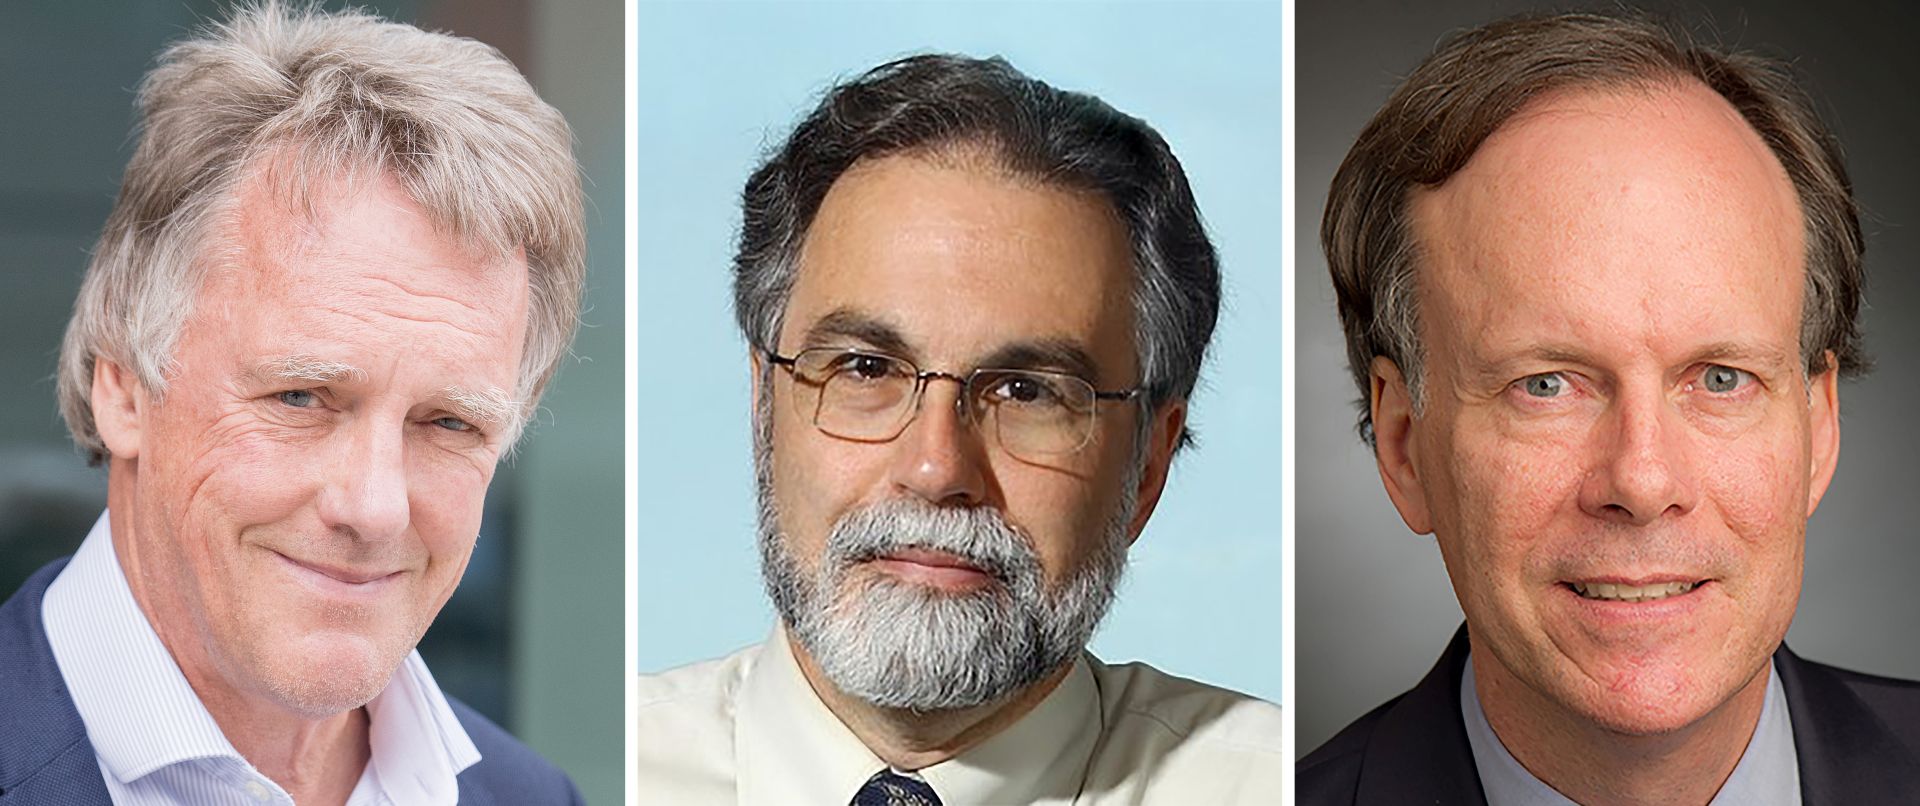 epa07903347 A combo of handout photos made available by the University of Oxford, Johns Hopkins University and Dana-Farber Cancer Institute shows (L-R) British scientist Sir Peter J. Ratcliffe, US scientists Gregg L. Semenza and William G. Kaelin, issued 07 October 2019. US scientists William G. Kaelin and Gregg L. Semenza and British scientist Sir Peter J. Ratcliffe were awarded the 2019 Nobel Prize in Physiology or Medicine 'for their discoveries of how cells sense and adapt to oxygen availability', the Karolinska Institute in Solna, Sweden, announced on 07 October 2019.  EPA/OXFORD/JOHNS HOPKINS/DANA FARBER HANDOUT  HANDOUT EDITORIAL USE ONLY/NO SALES